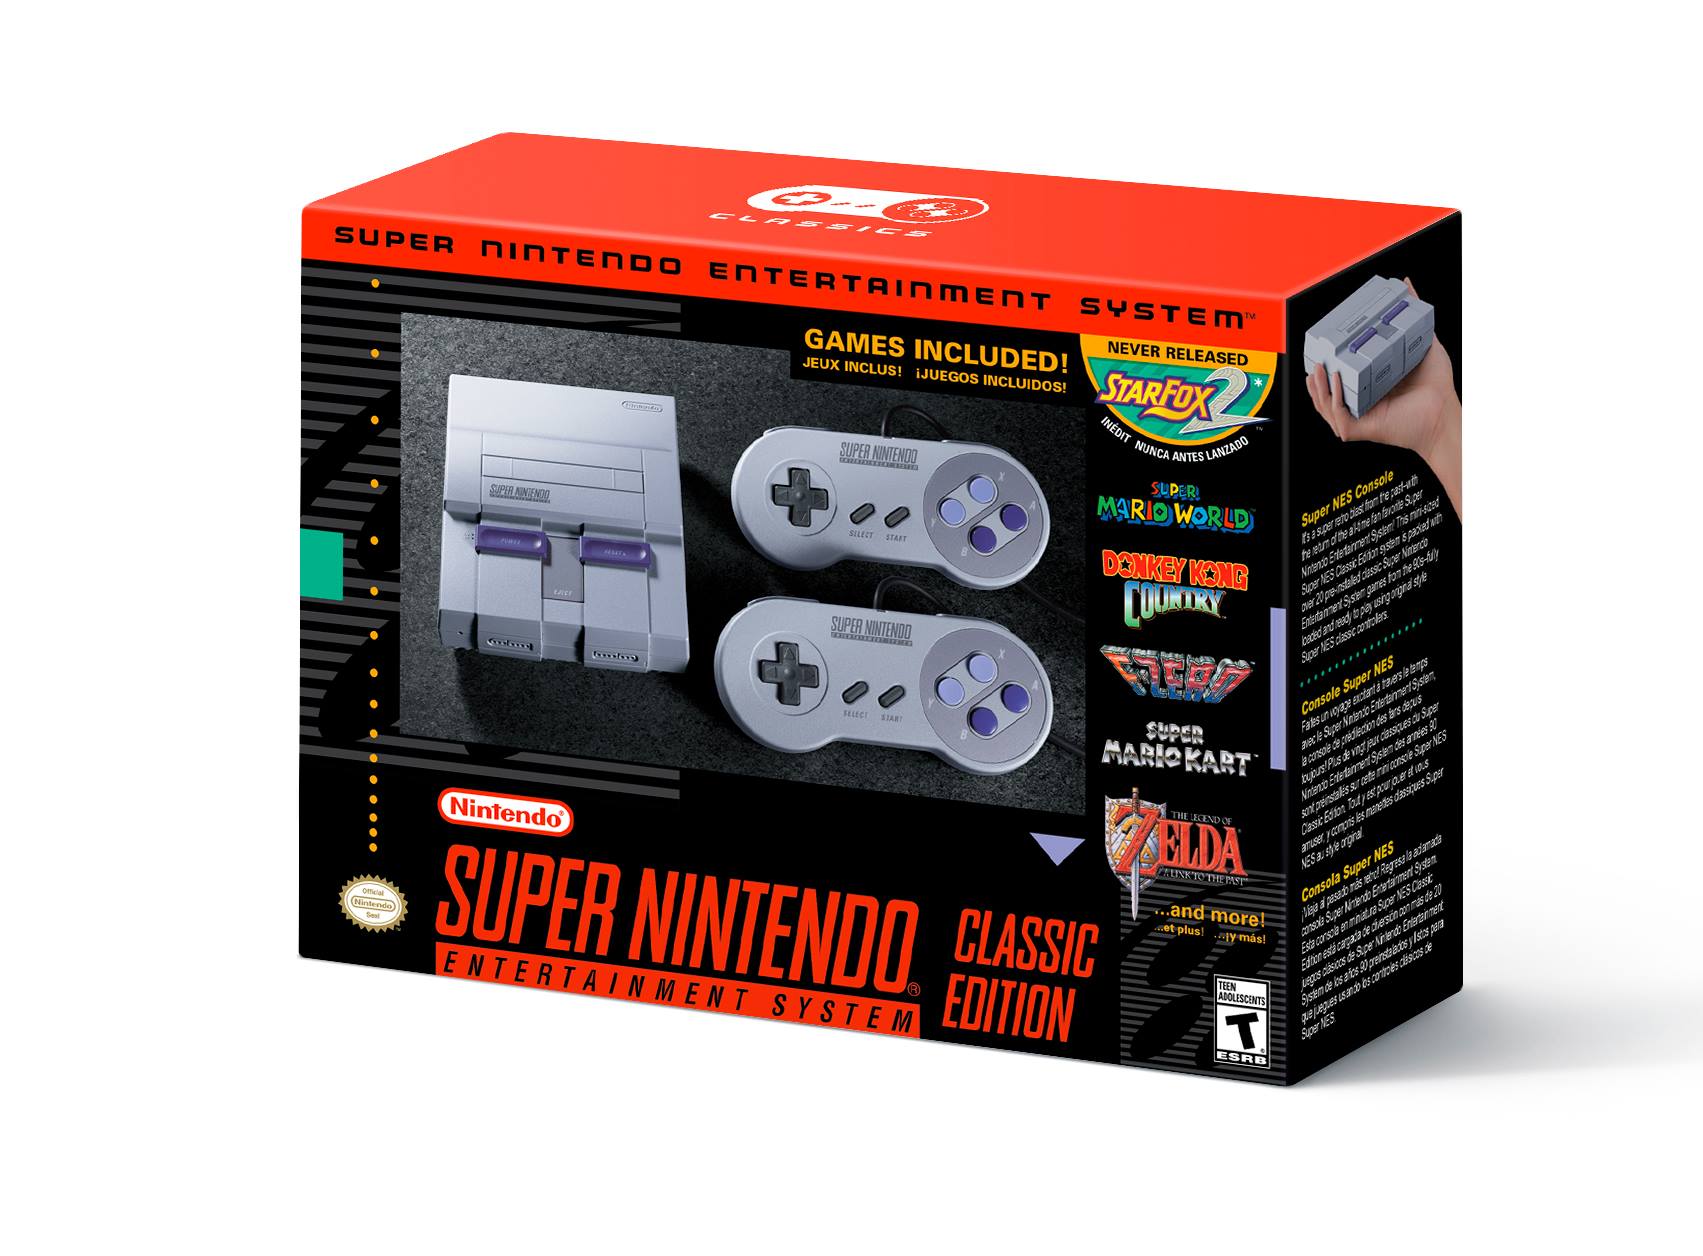 The Super Nintendo Classic Edition is coming this September